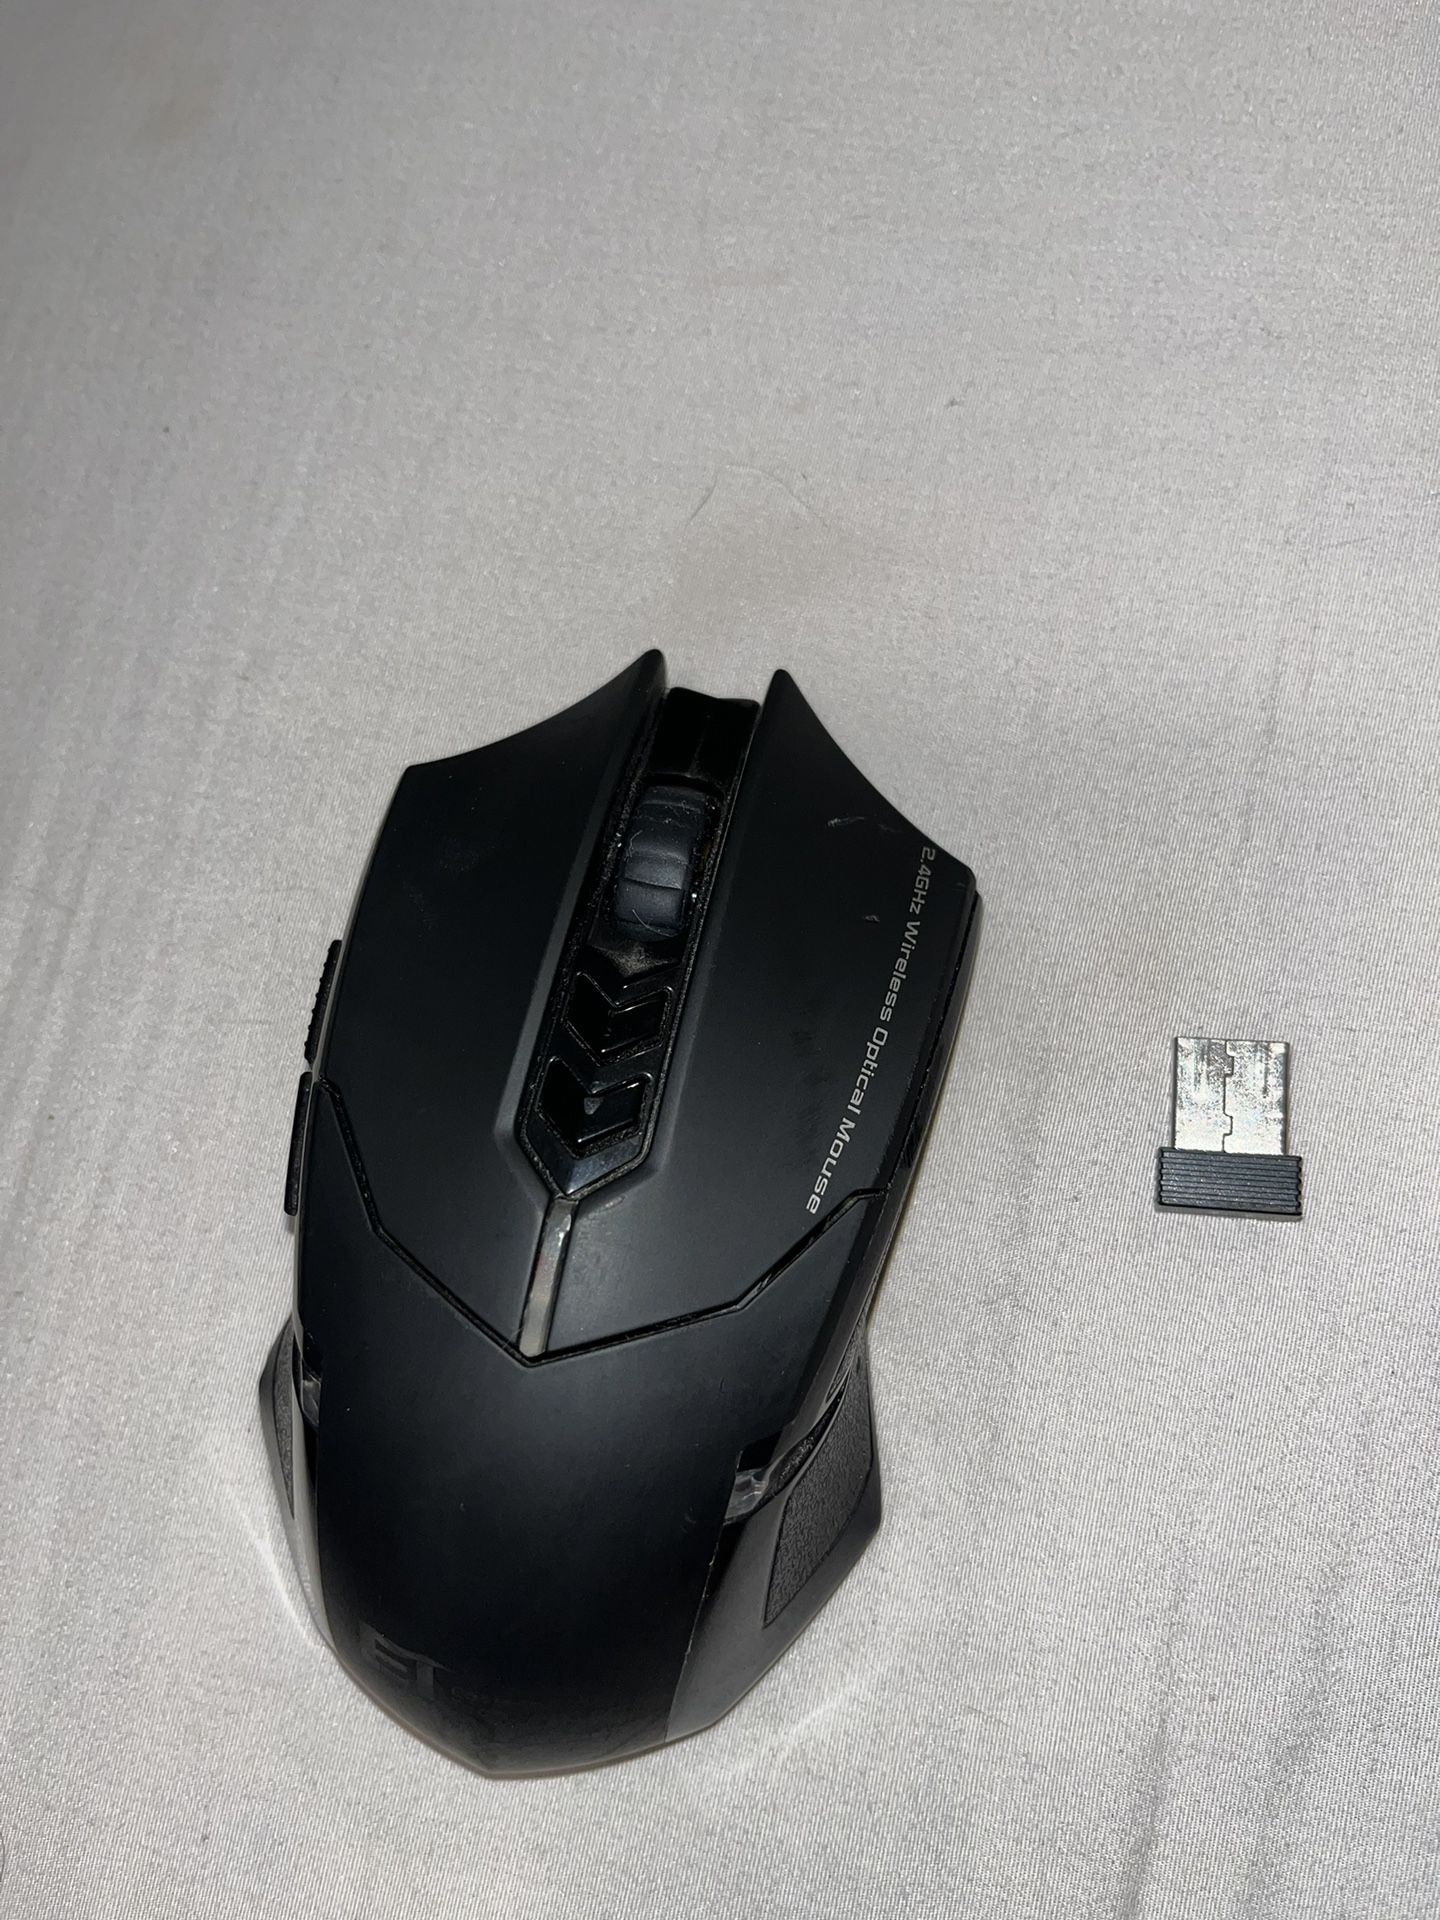 Easterntimes Tech Wireless Optical Gaming Mouse